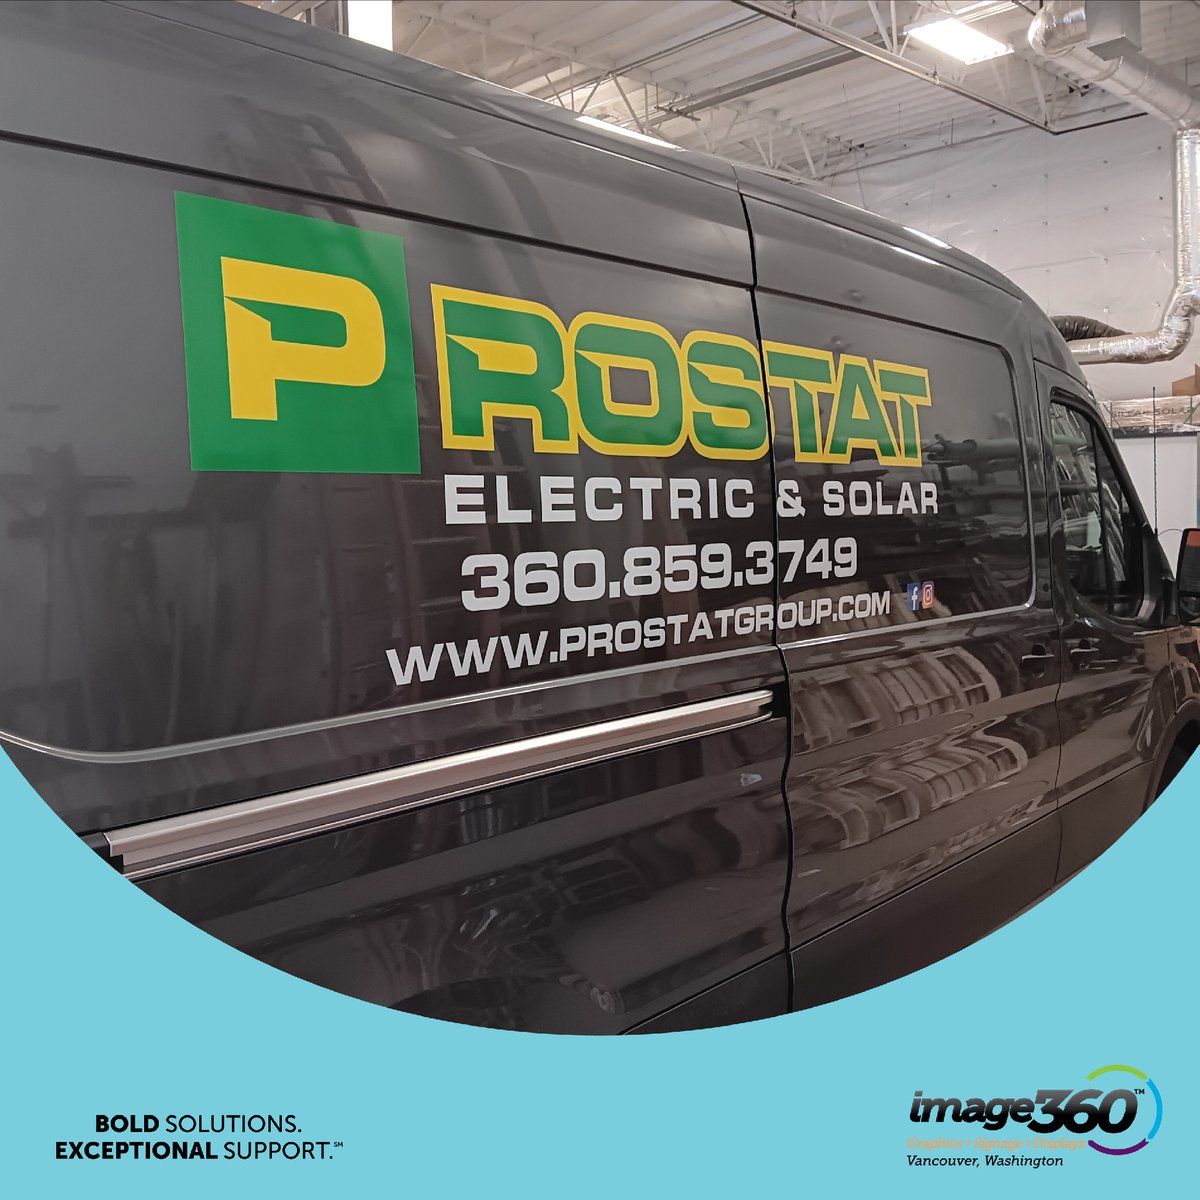 New vehicle graphics for our friends at ProStat!
#image360 #image360vancouver #vancouverwa #clarkcounty #portland #signage #graphics #displays #vehiclegraphics #vehiclewrap #vinylgraphics #graphicdesign #branding #marketing #sign #signs #localbusiness #smallbusiness #advertising